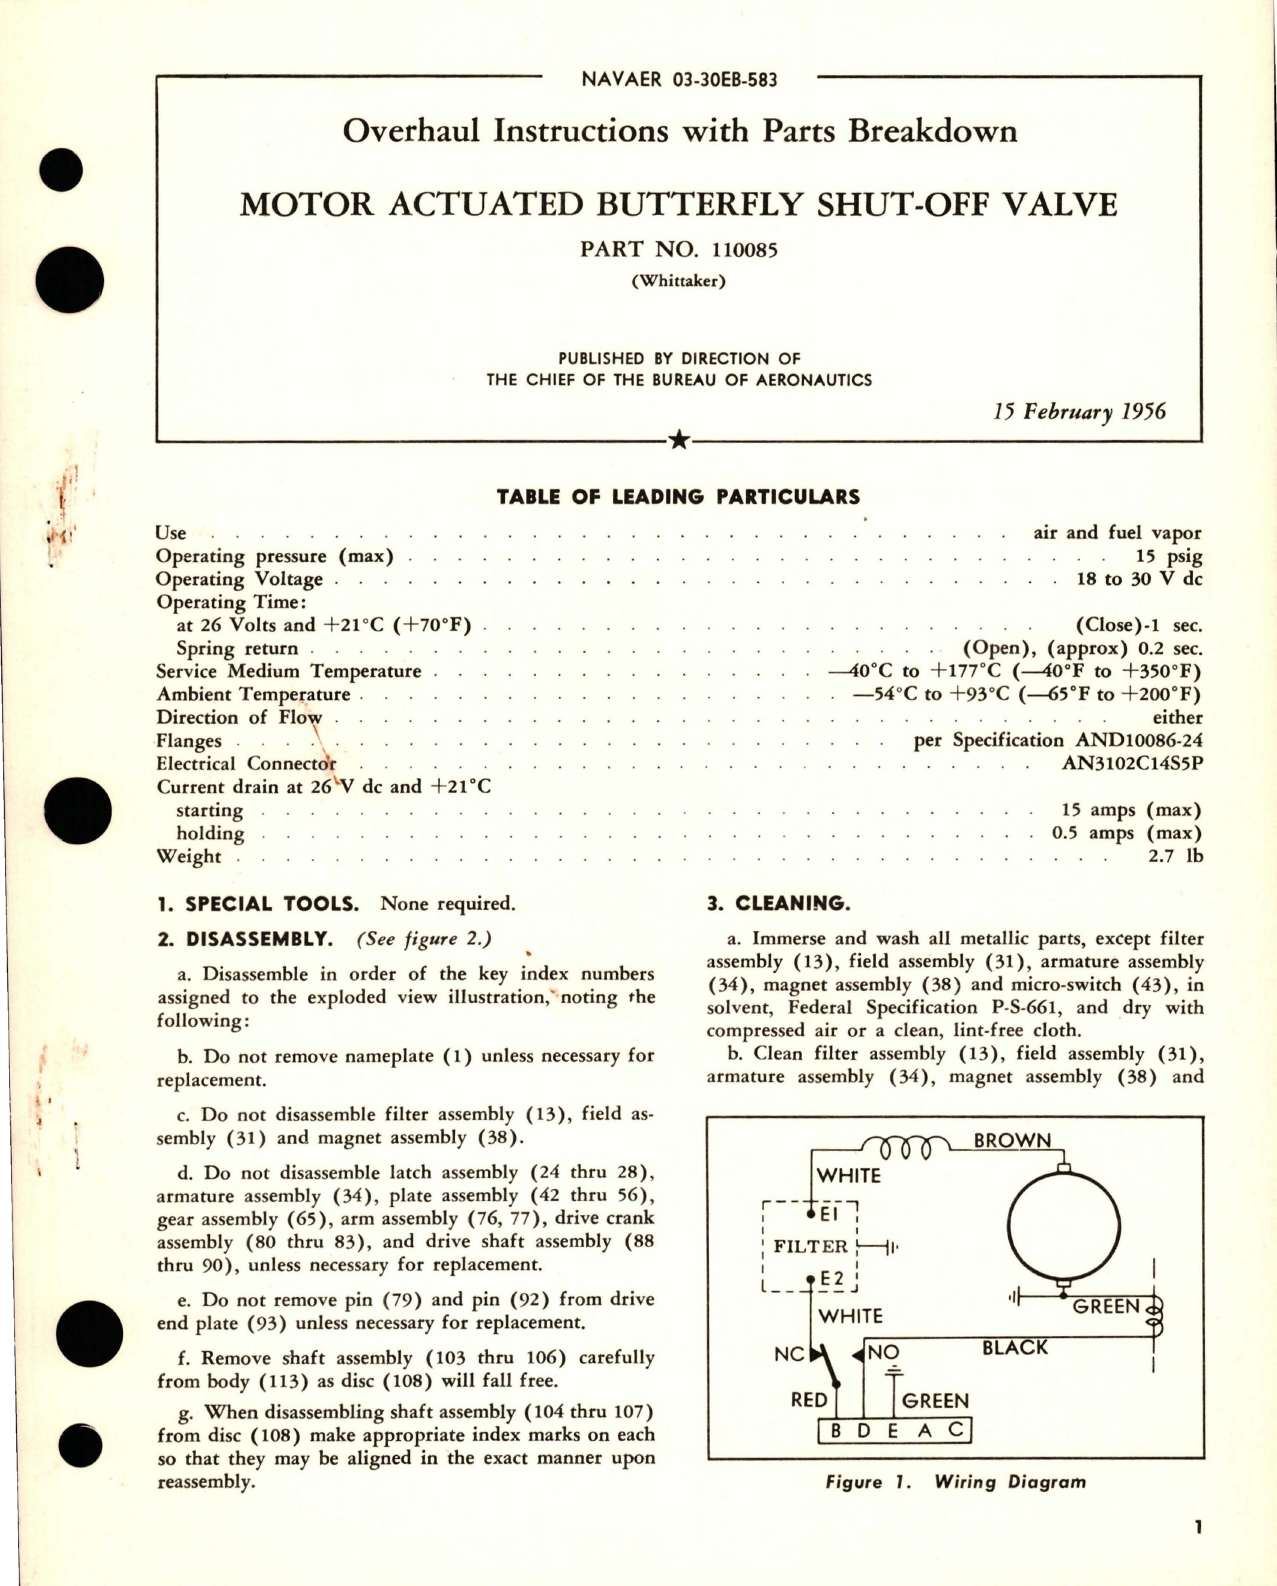 Sample page 1 from AirCorps Library document: Overhaul Instructions with Parts Breakdown for Motor Actuated Butterfly Shut-Off Valve - Part 110085 